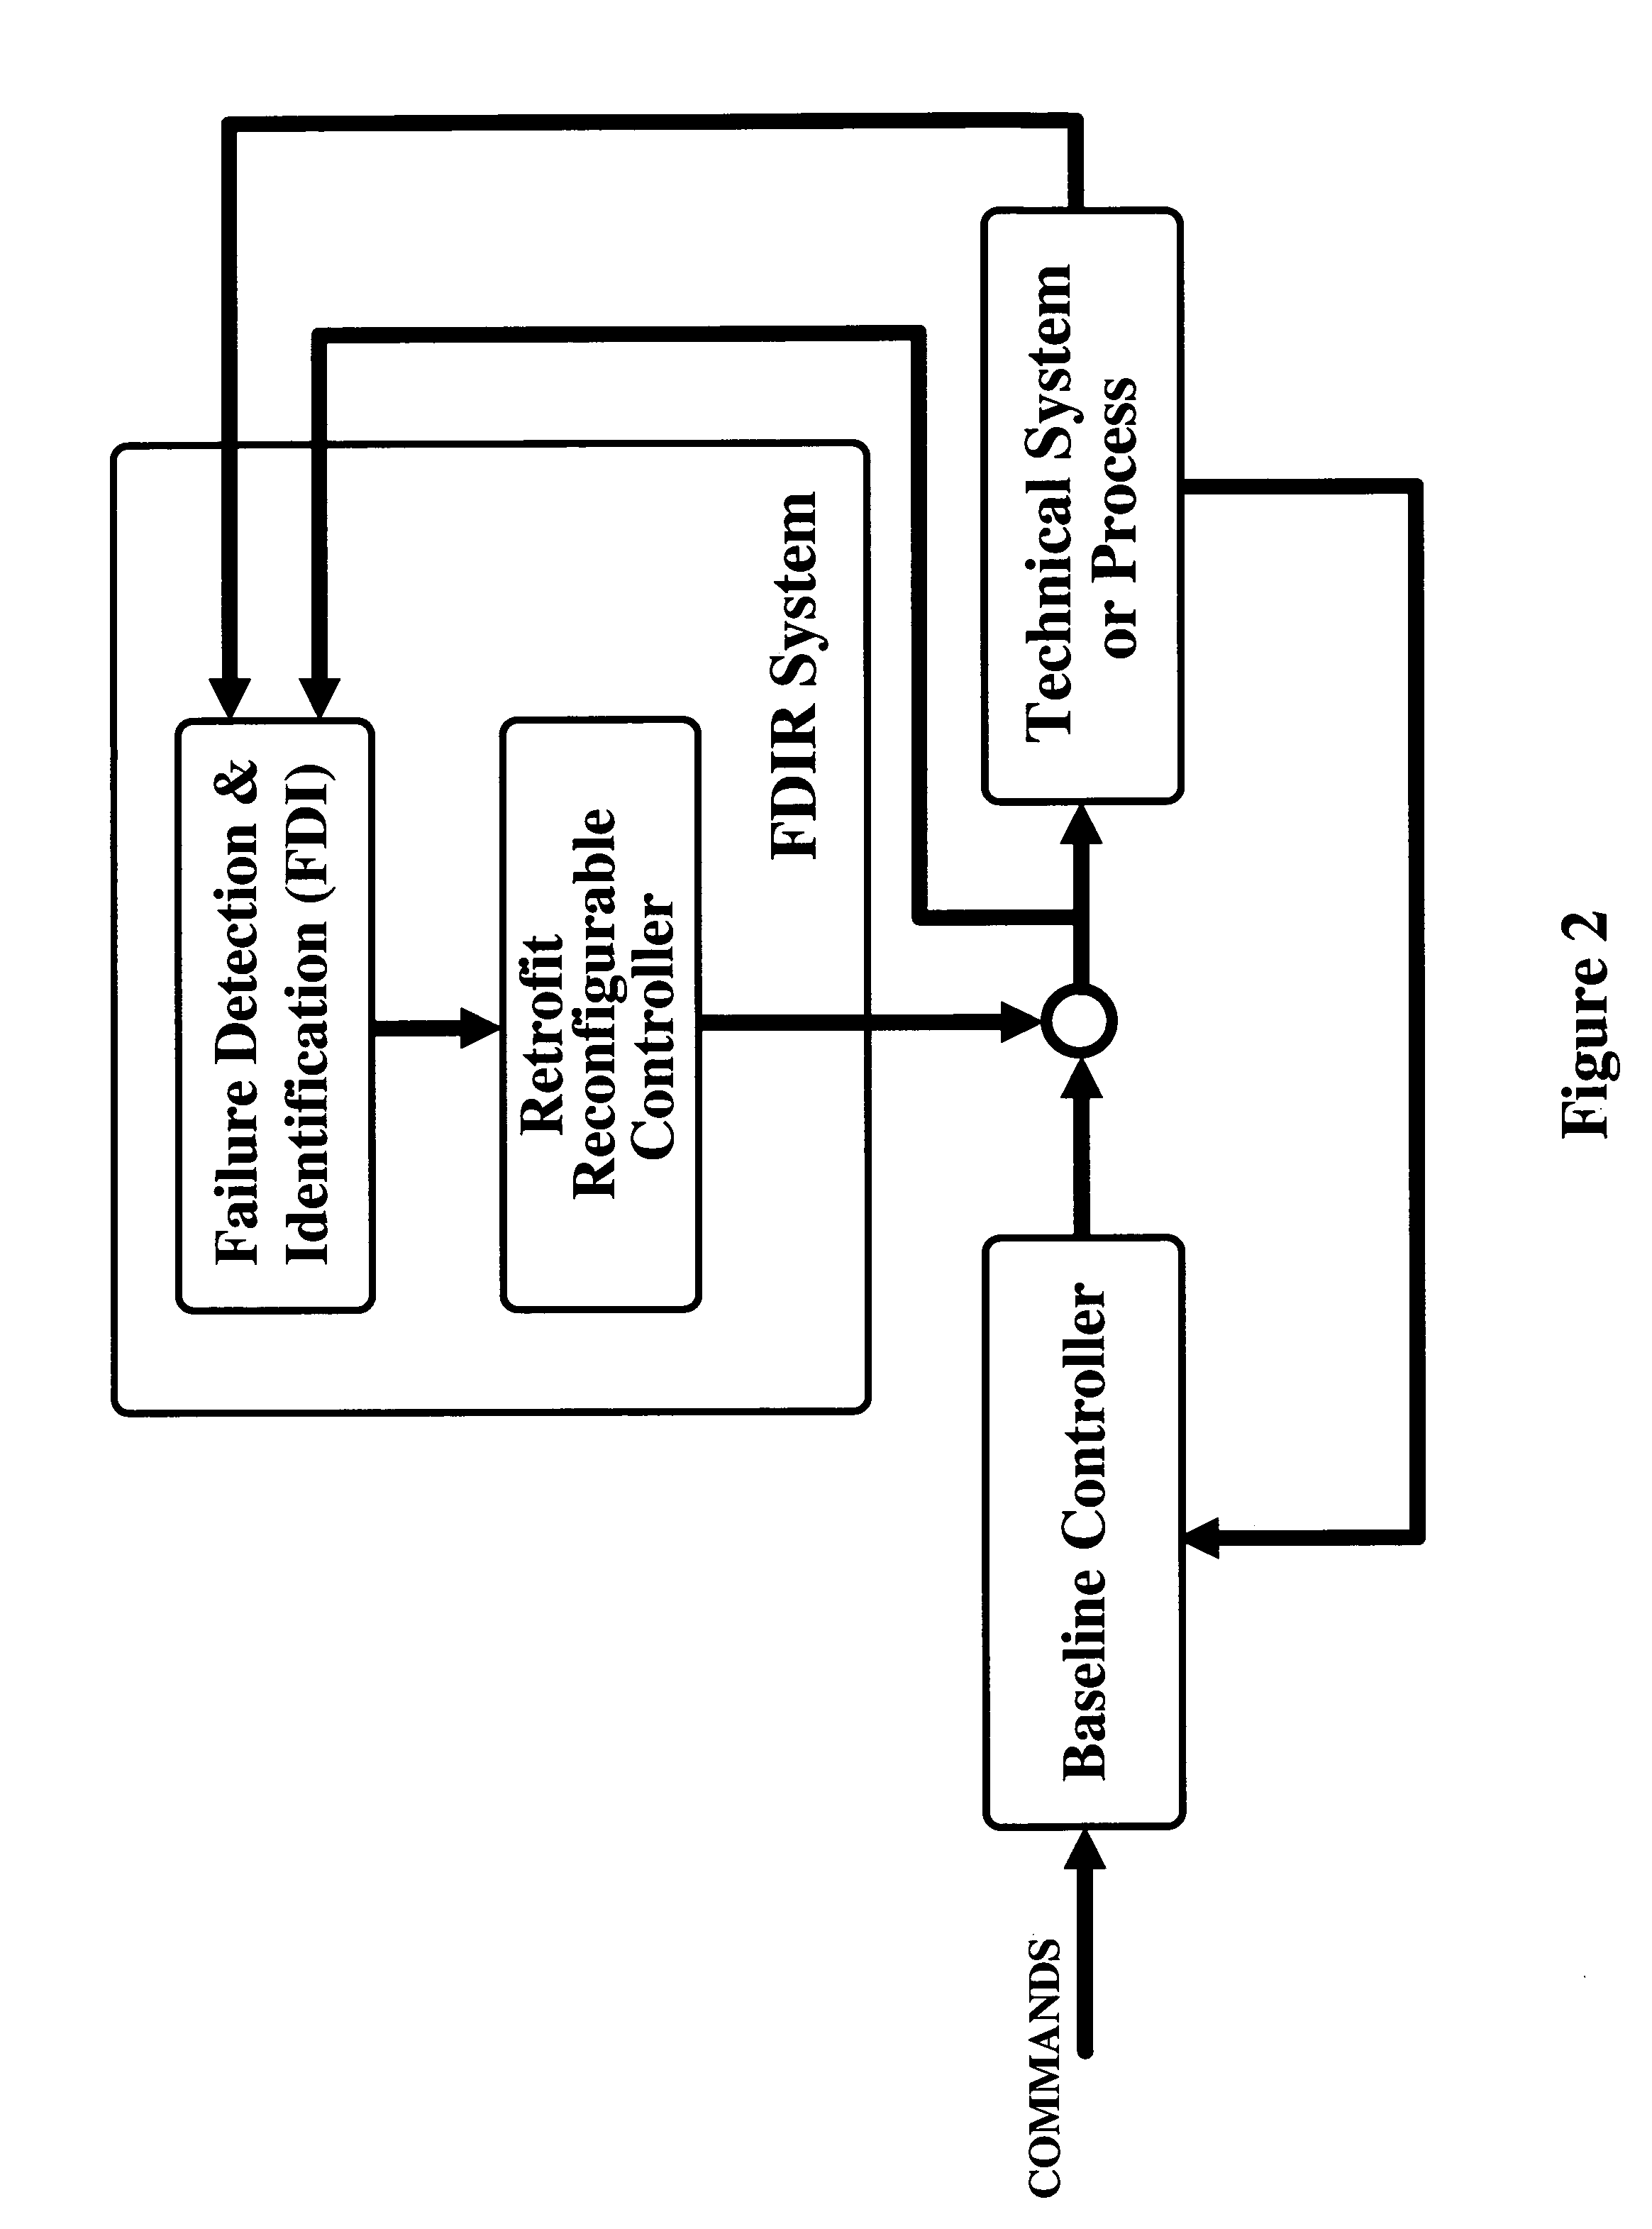 Methods and apparatus for safe, fault-tolerant control of complex technical systems